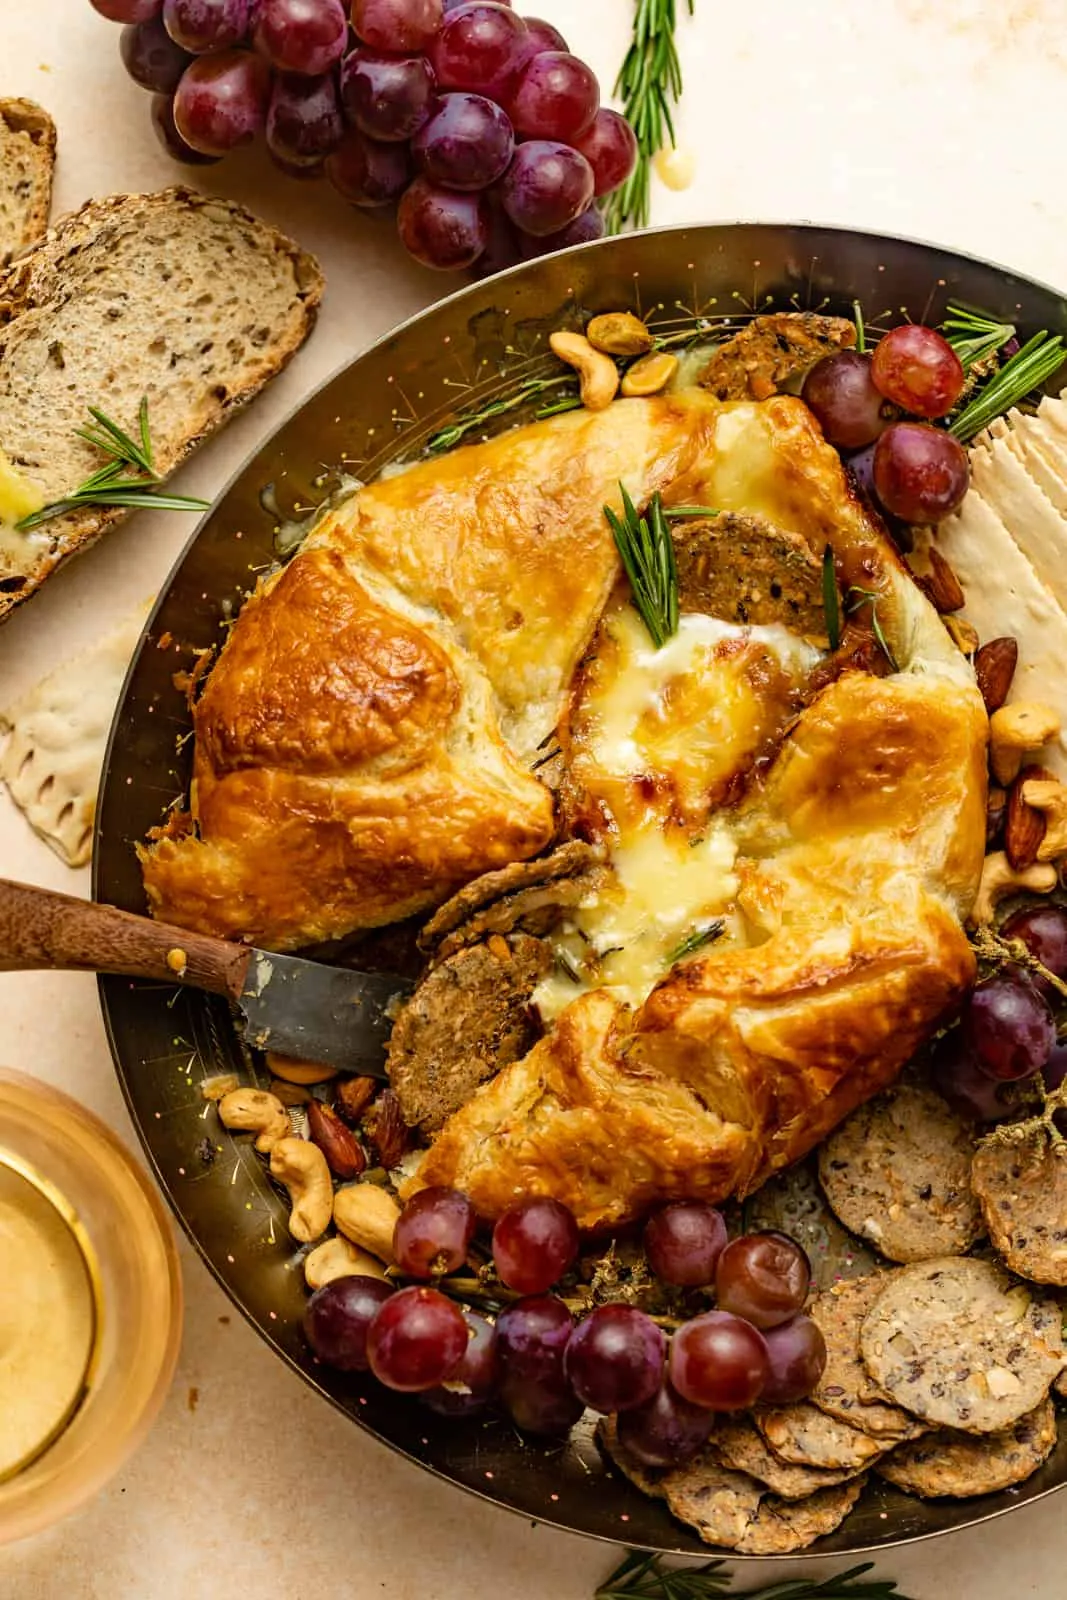 baked brie in puff pastry